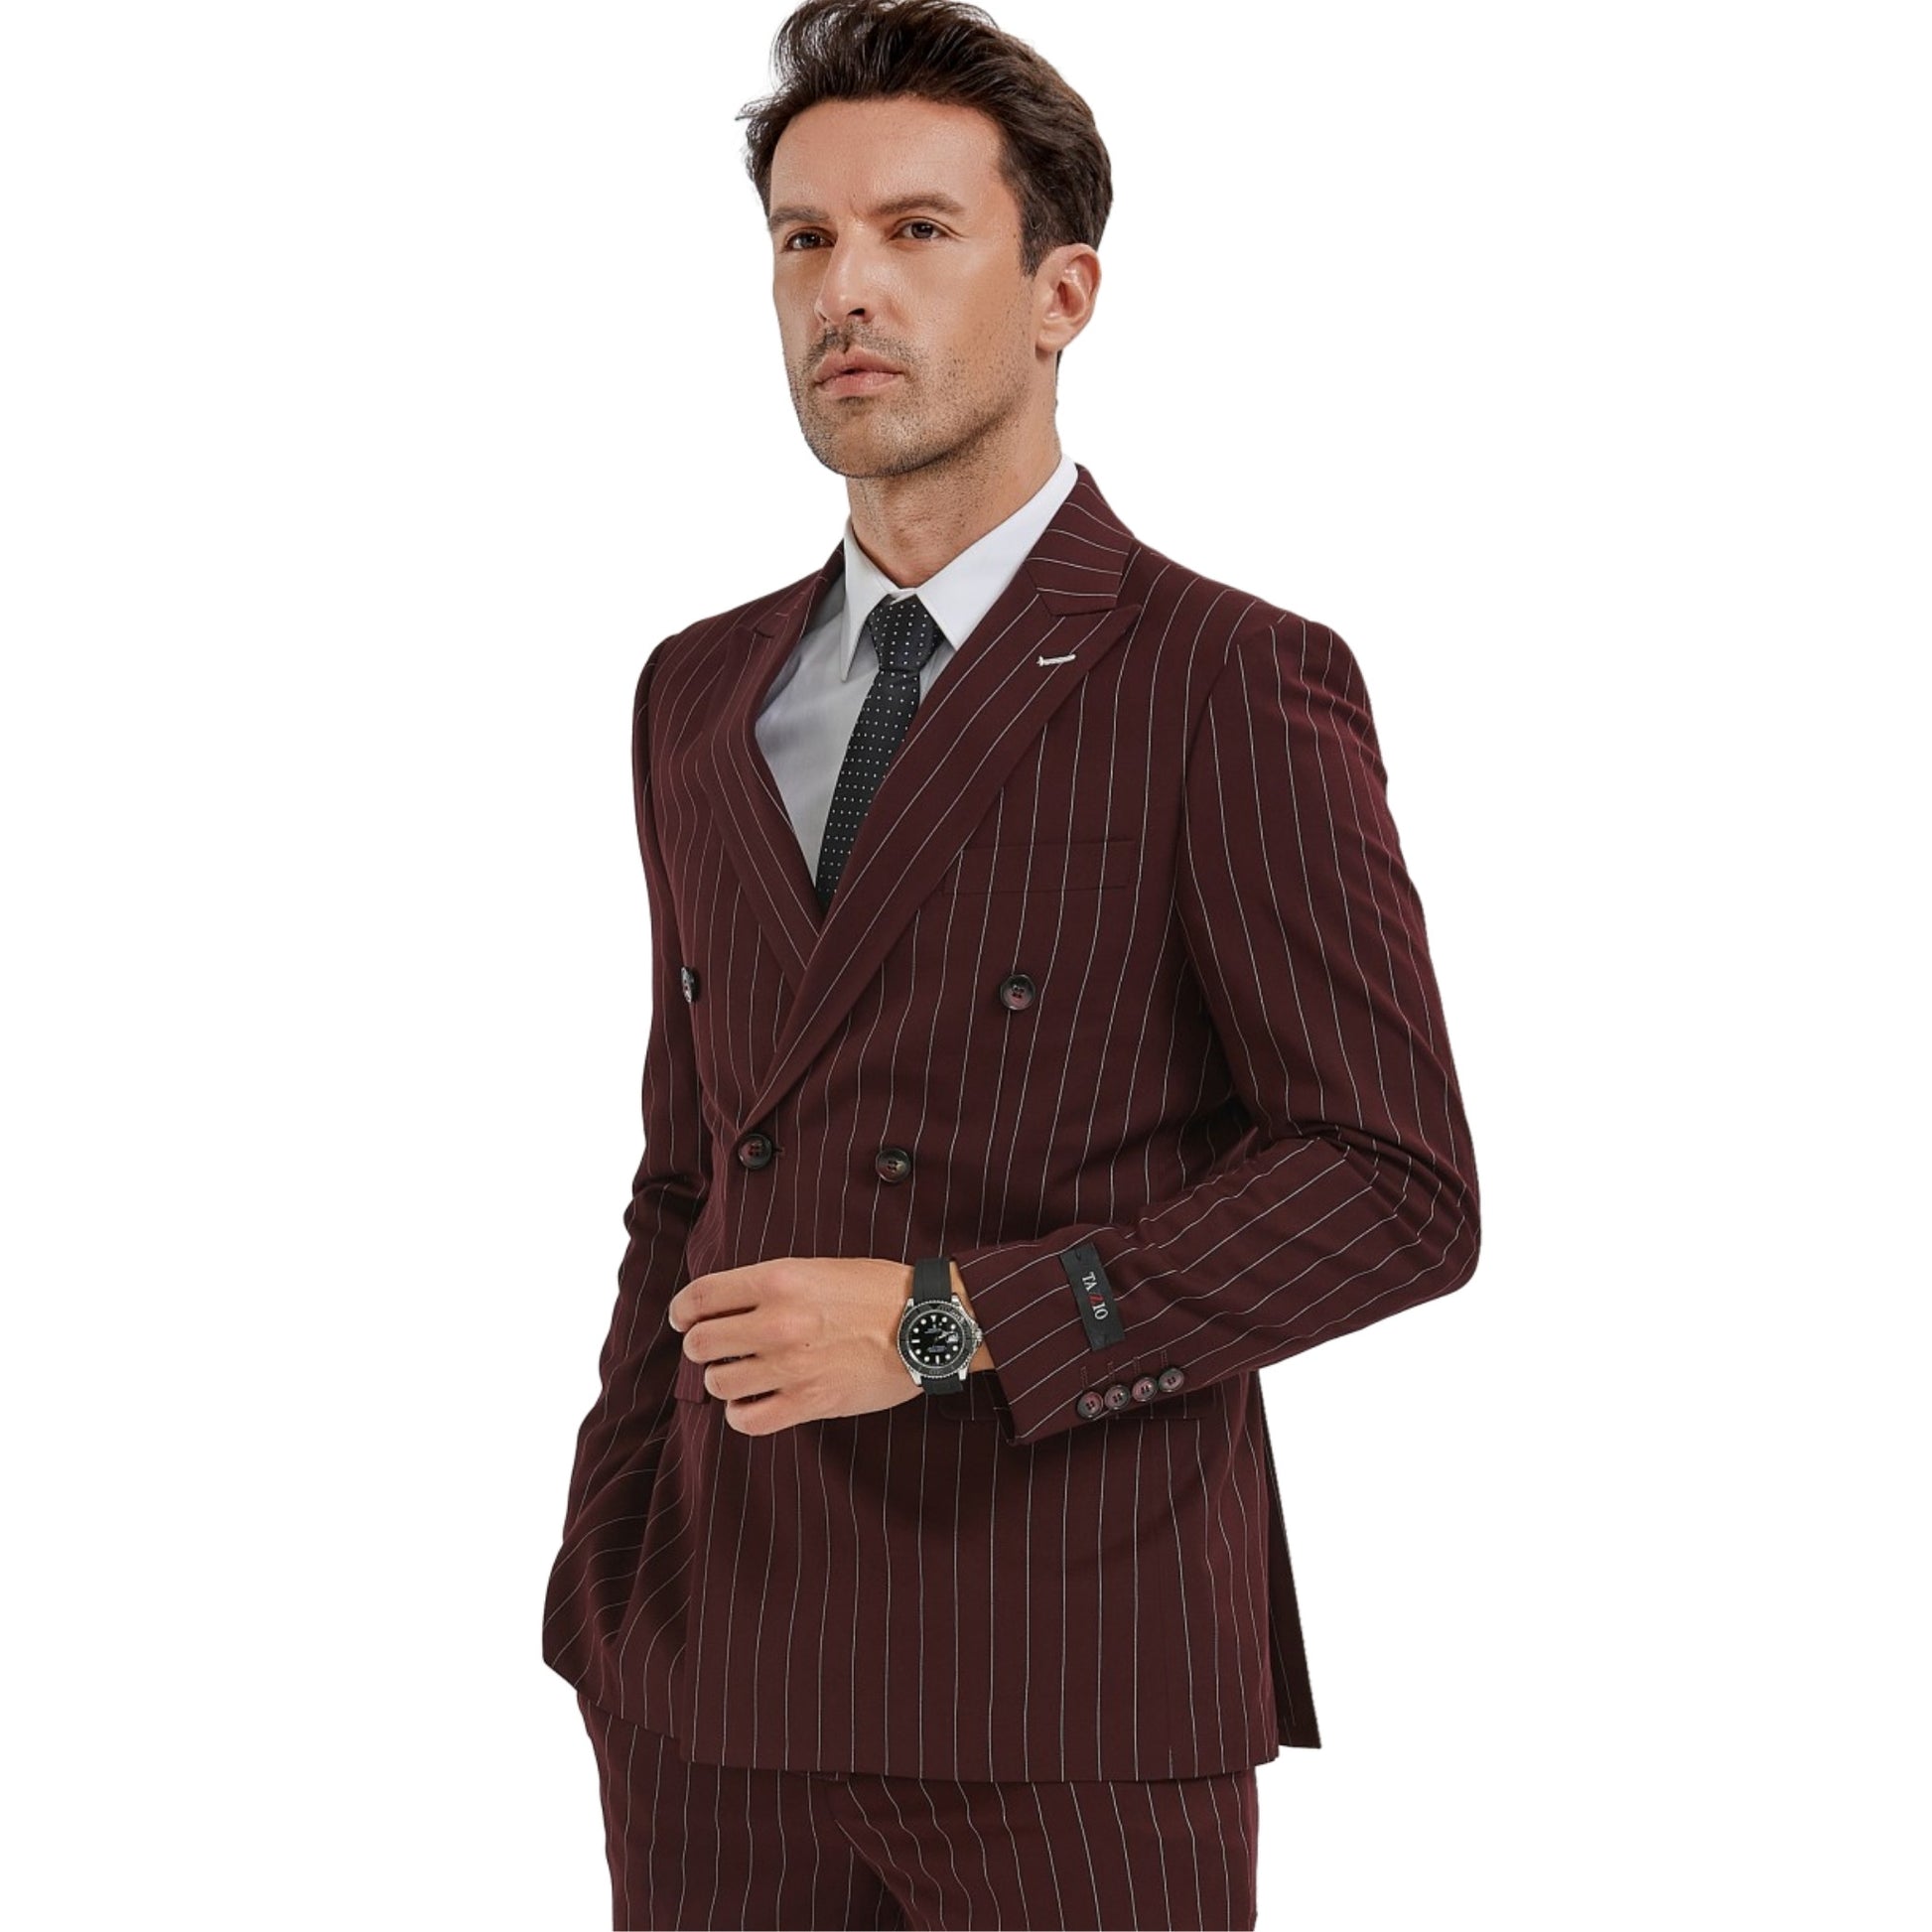 KCT Menswear's Burgundy Pinstripe Double-Breasted Suit showcasing elegance and modern tailoring